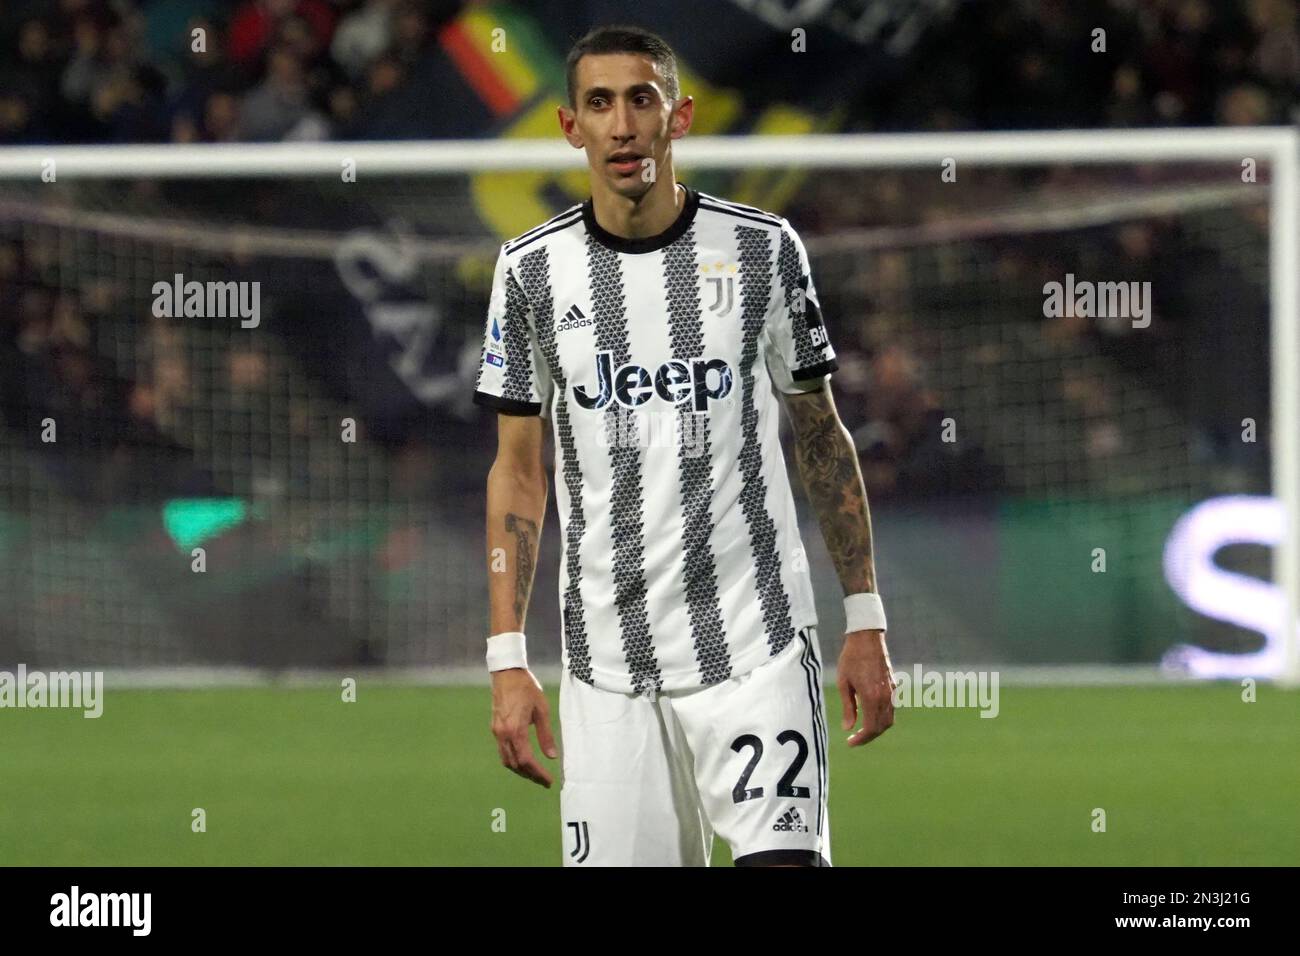 Salerno, Italy. 07th Feb, 2023. player of Juventus, during the match of the  Italian Serie A league between Salernitana vs Juventus final result,  Salernitana 0, Juventus 3, match played at the Arechi